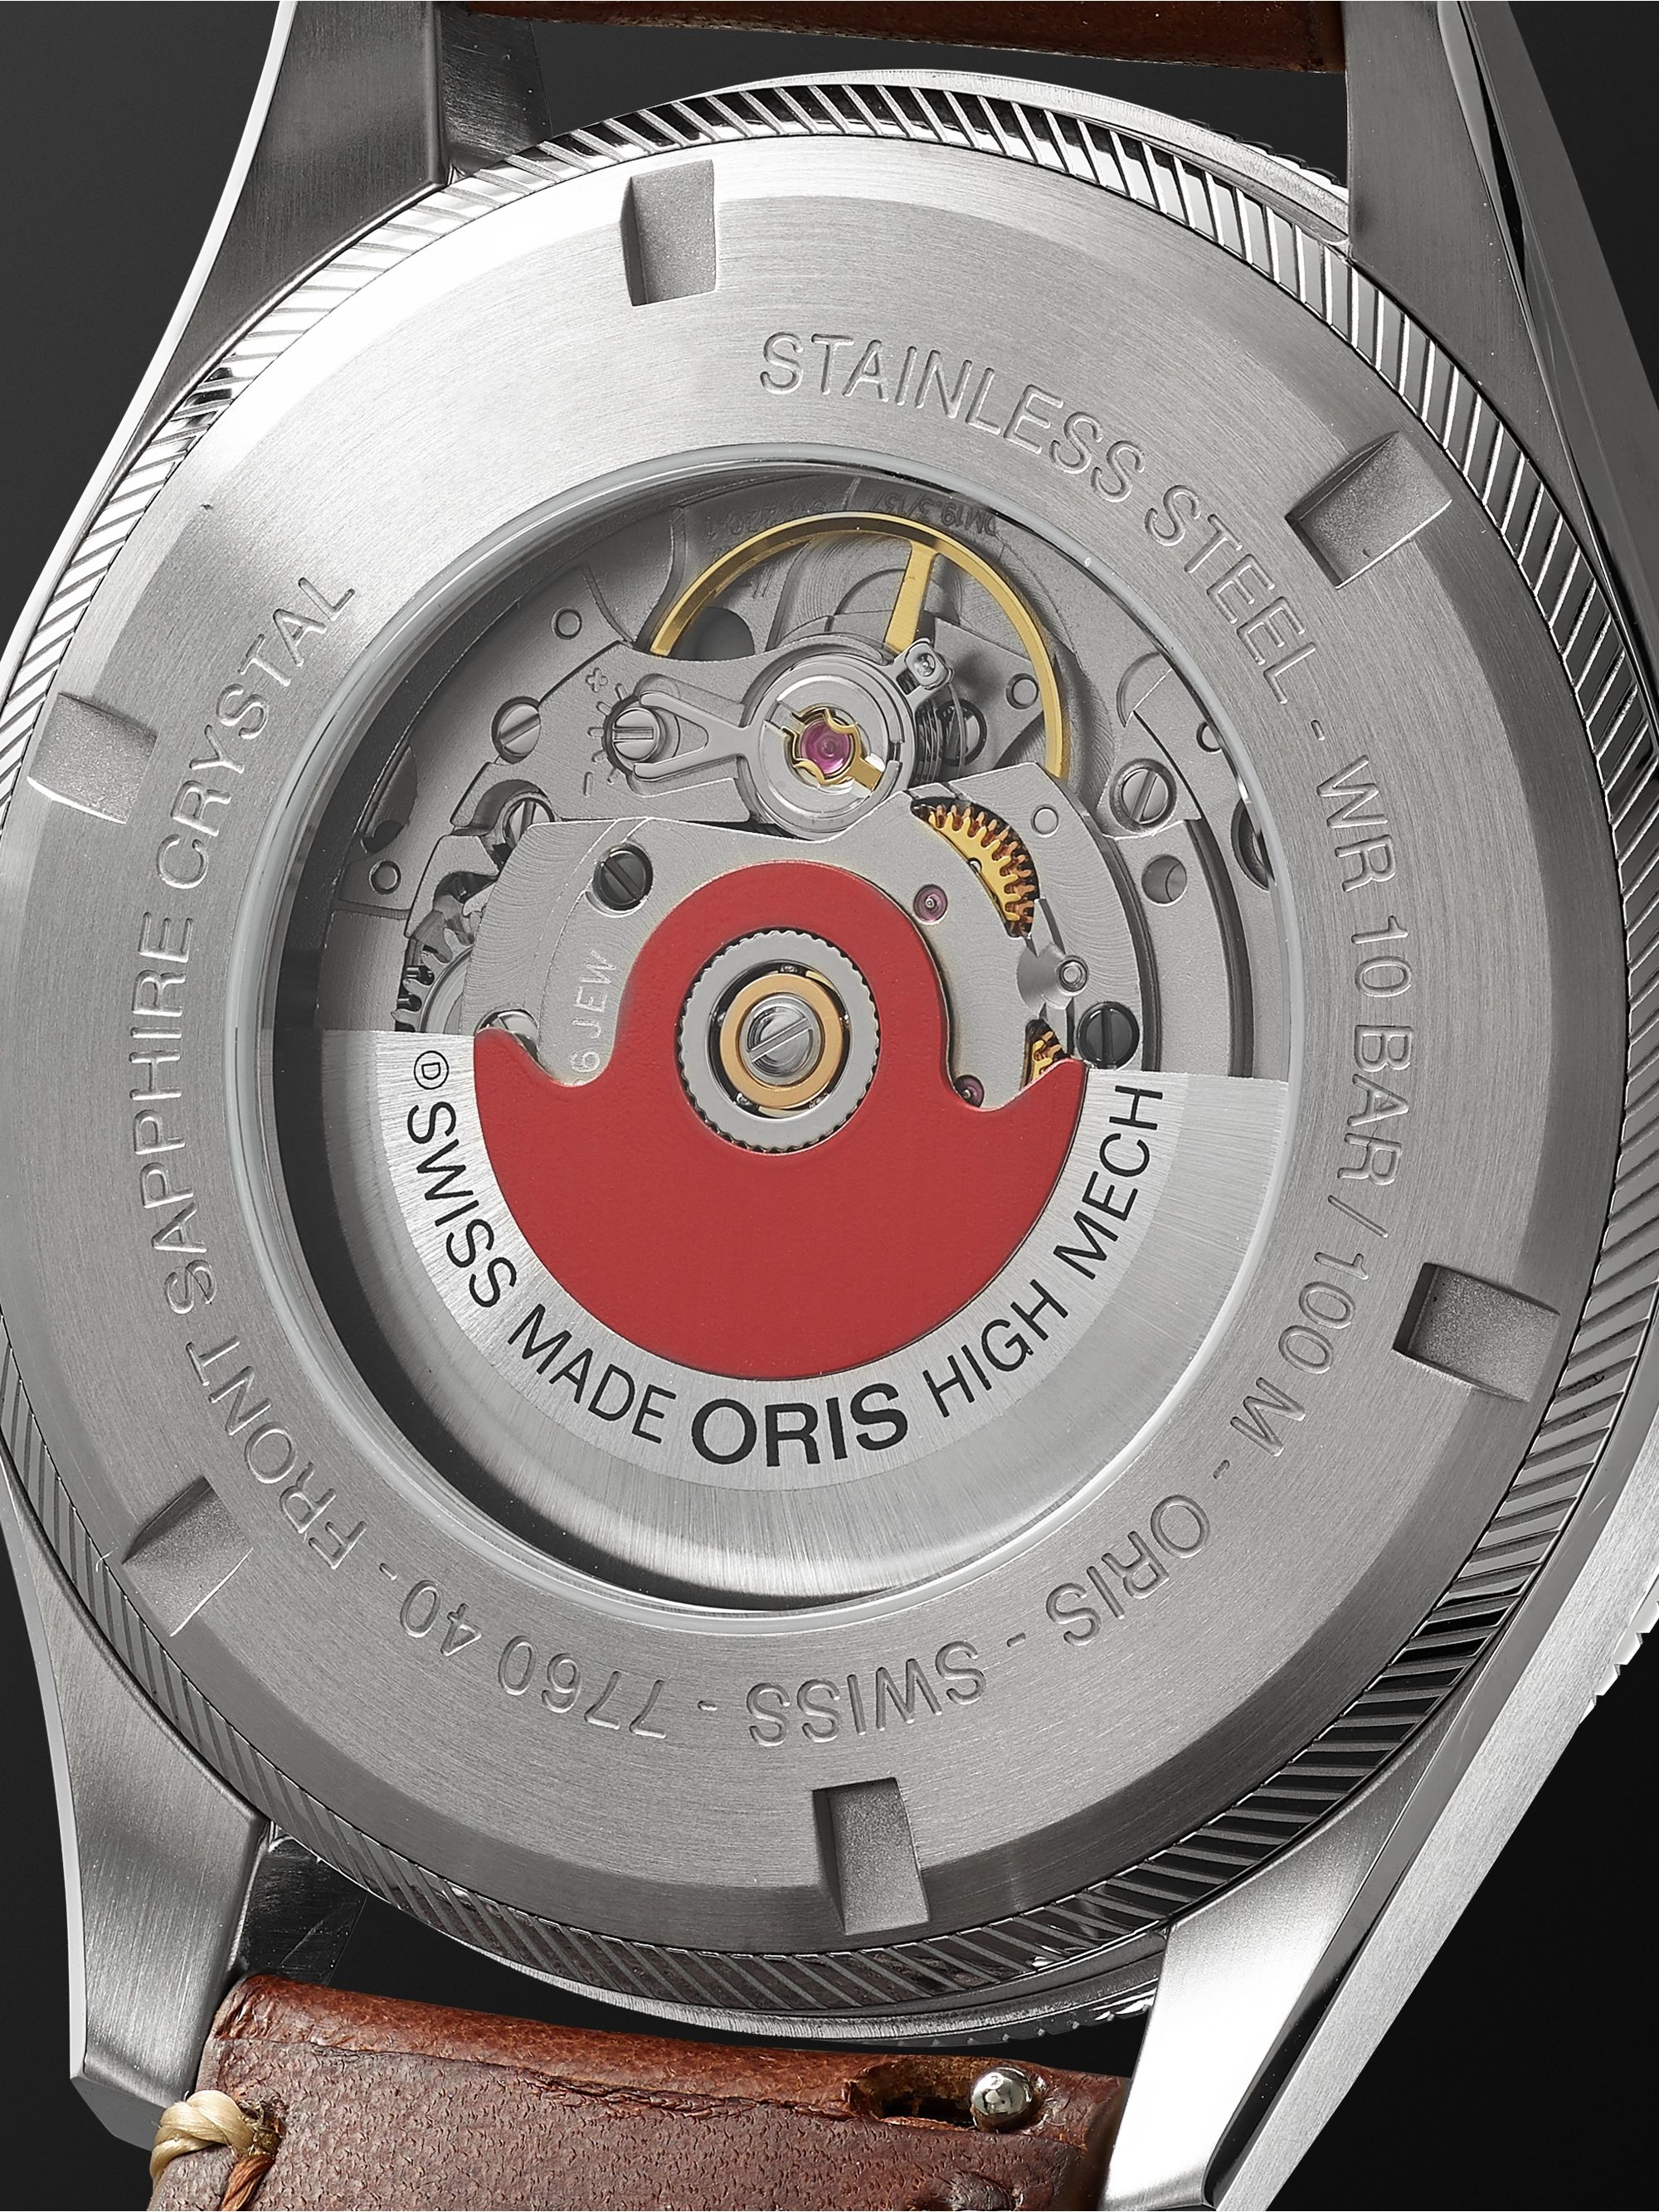 ORIS Big Crown ProPilot Big Day Date Automatic 44mm Stainless Steel and Leather Watch, Ref. No. 01 752 7760 4065-07 5 22 07LC